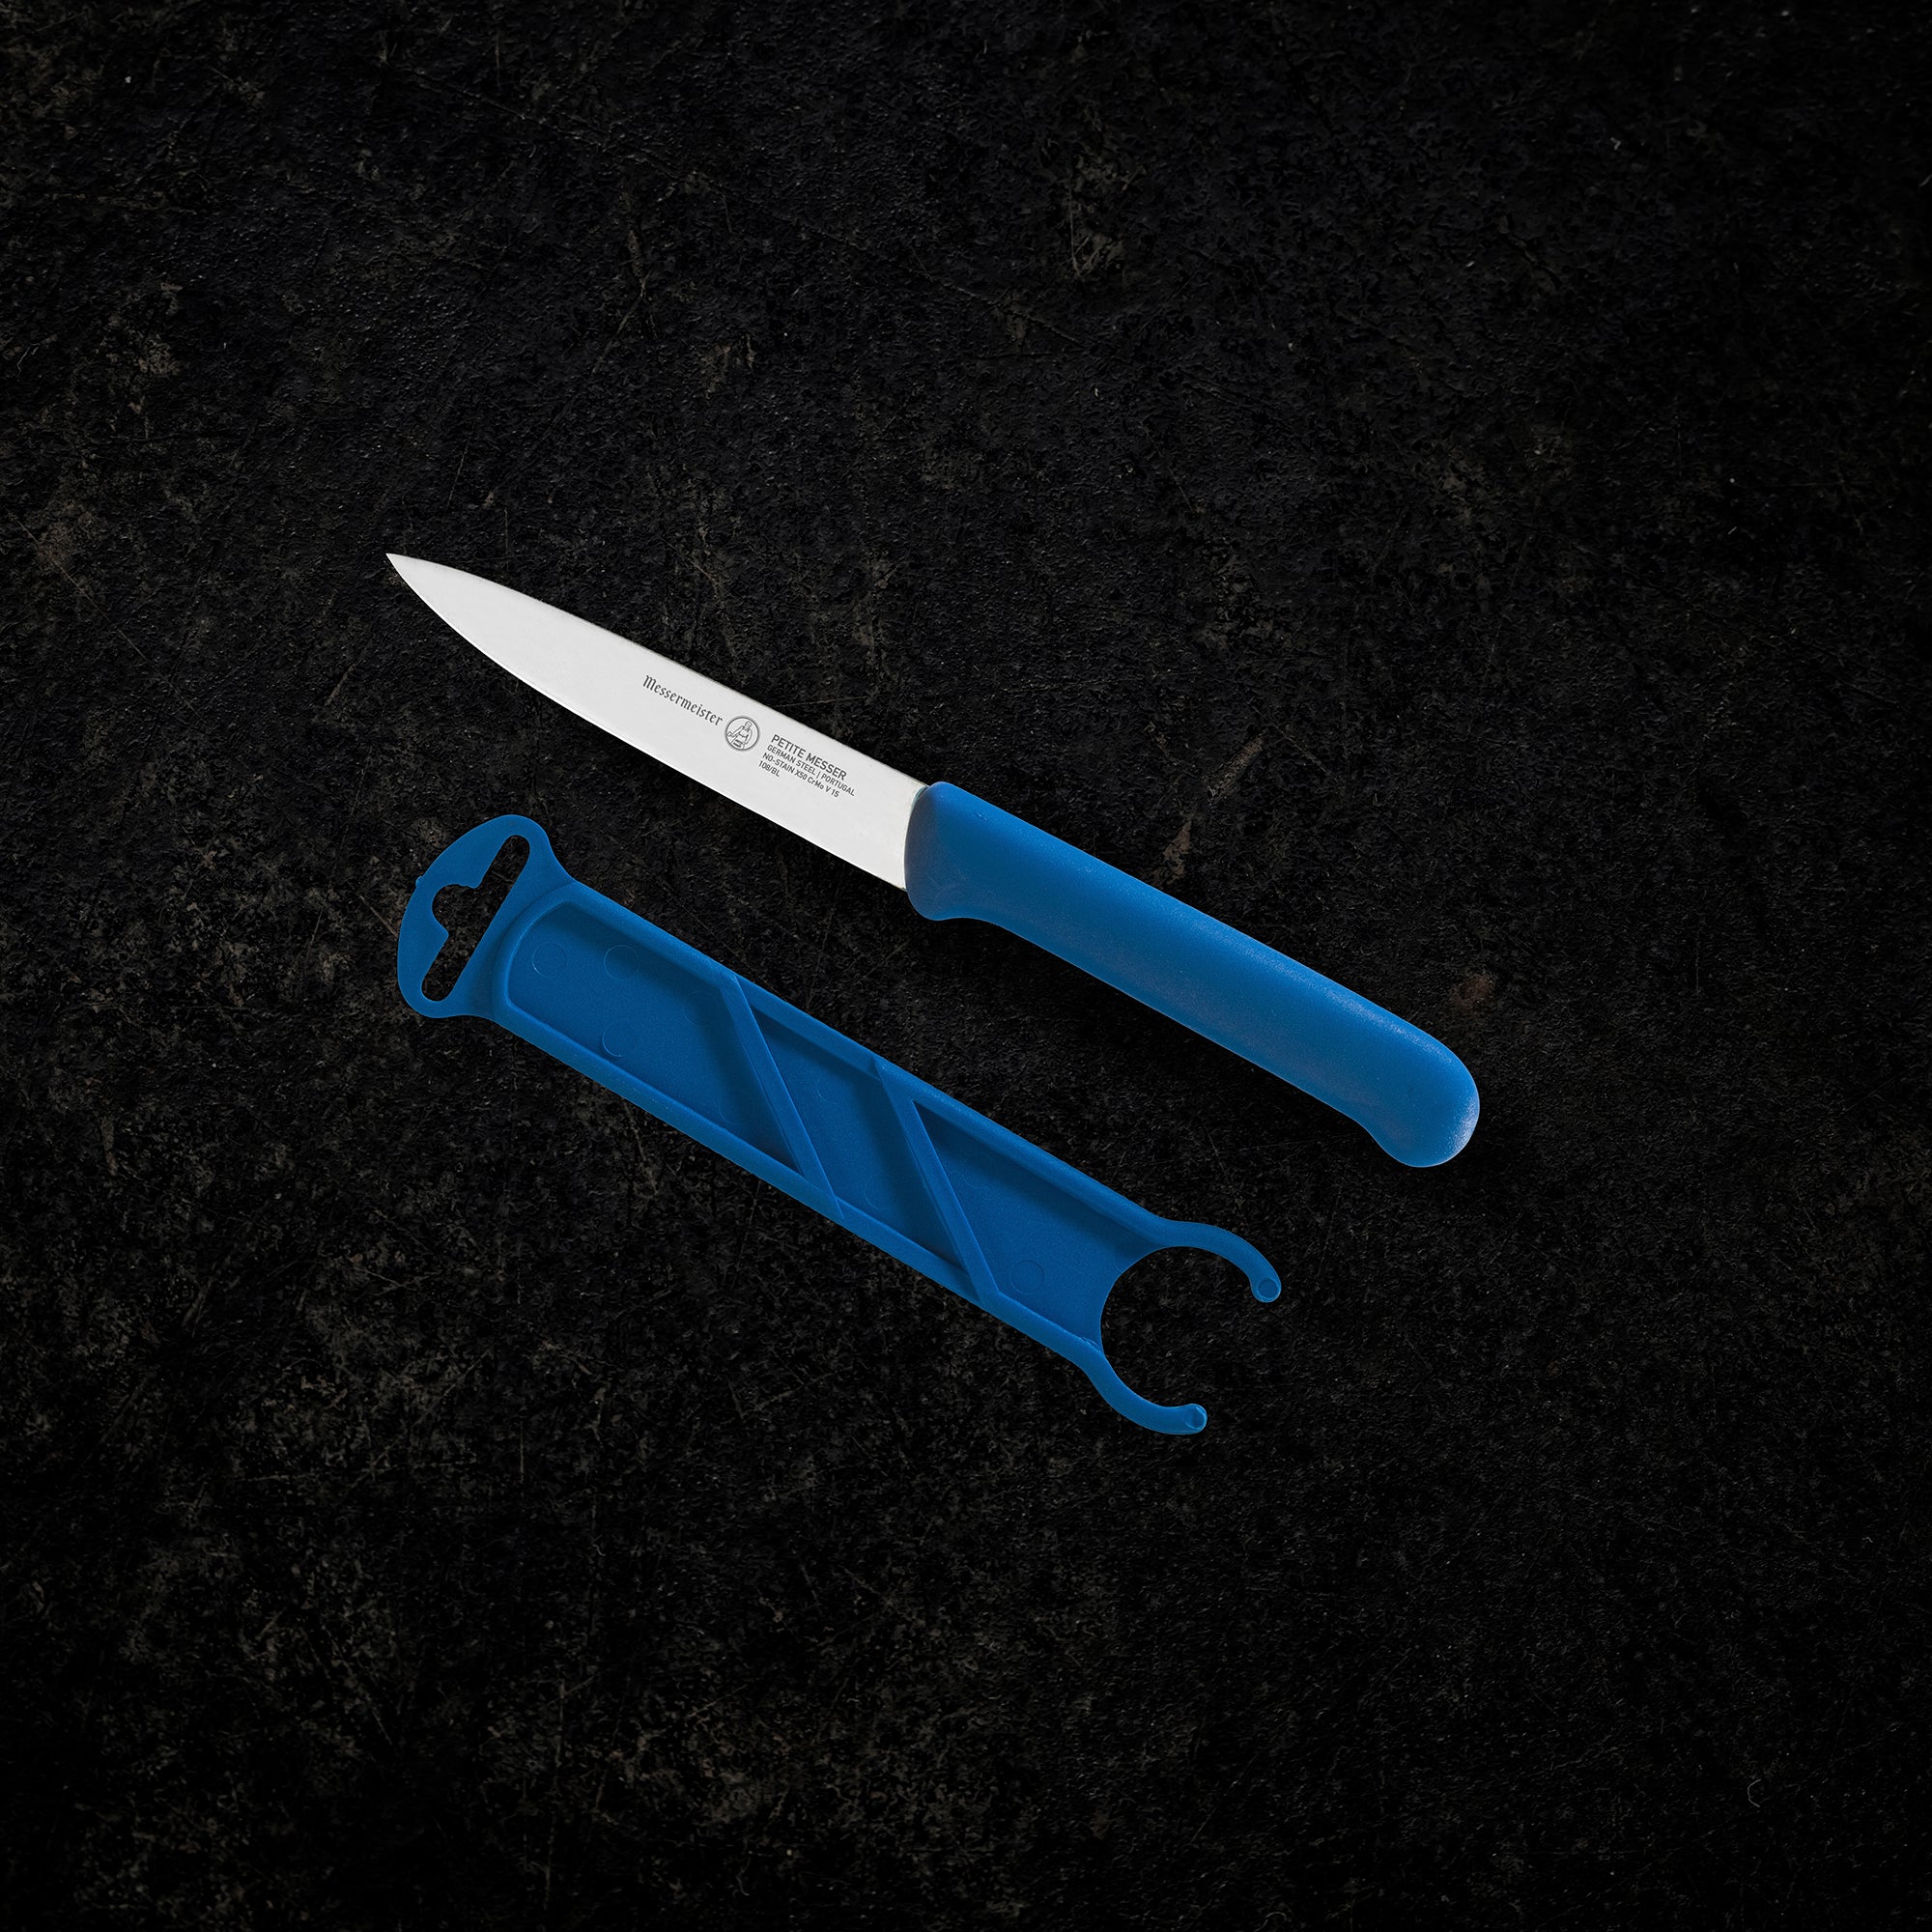 4 Inch Spear Point Parer with Matching Sheath - Blue